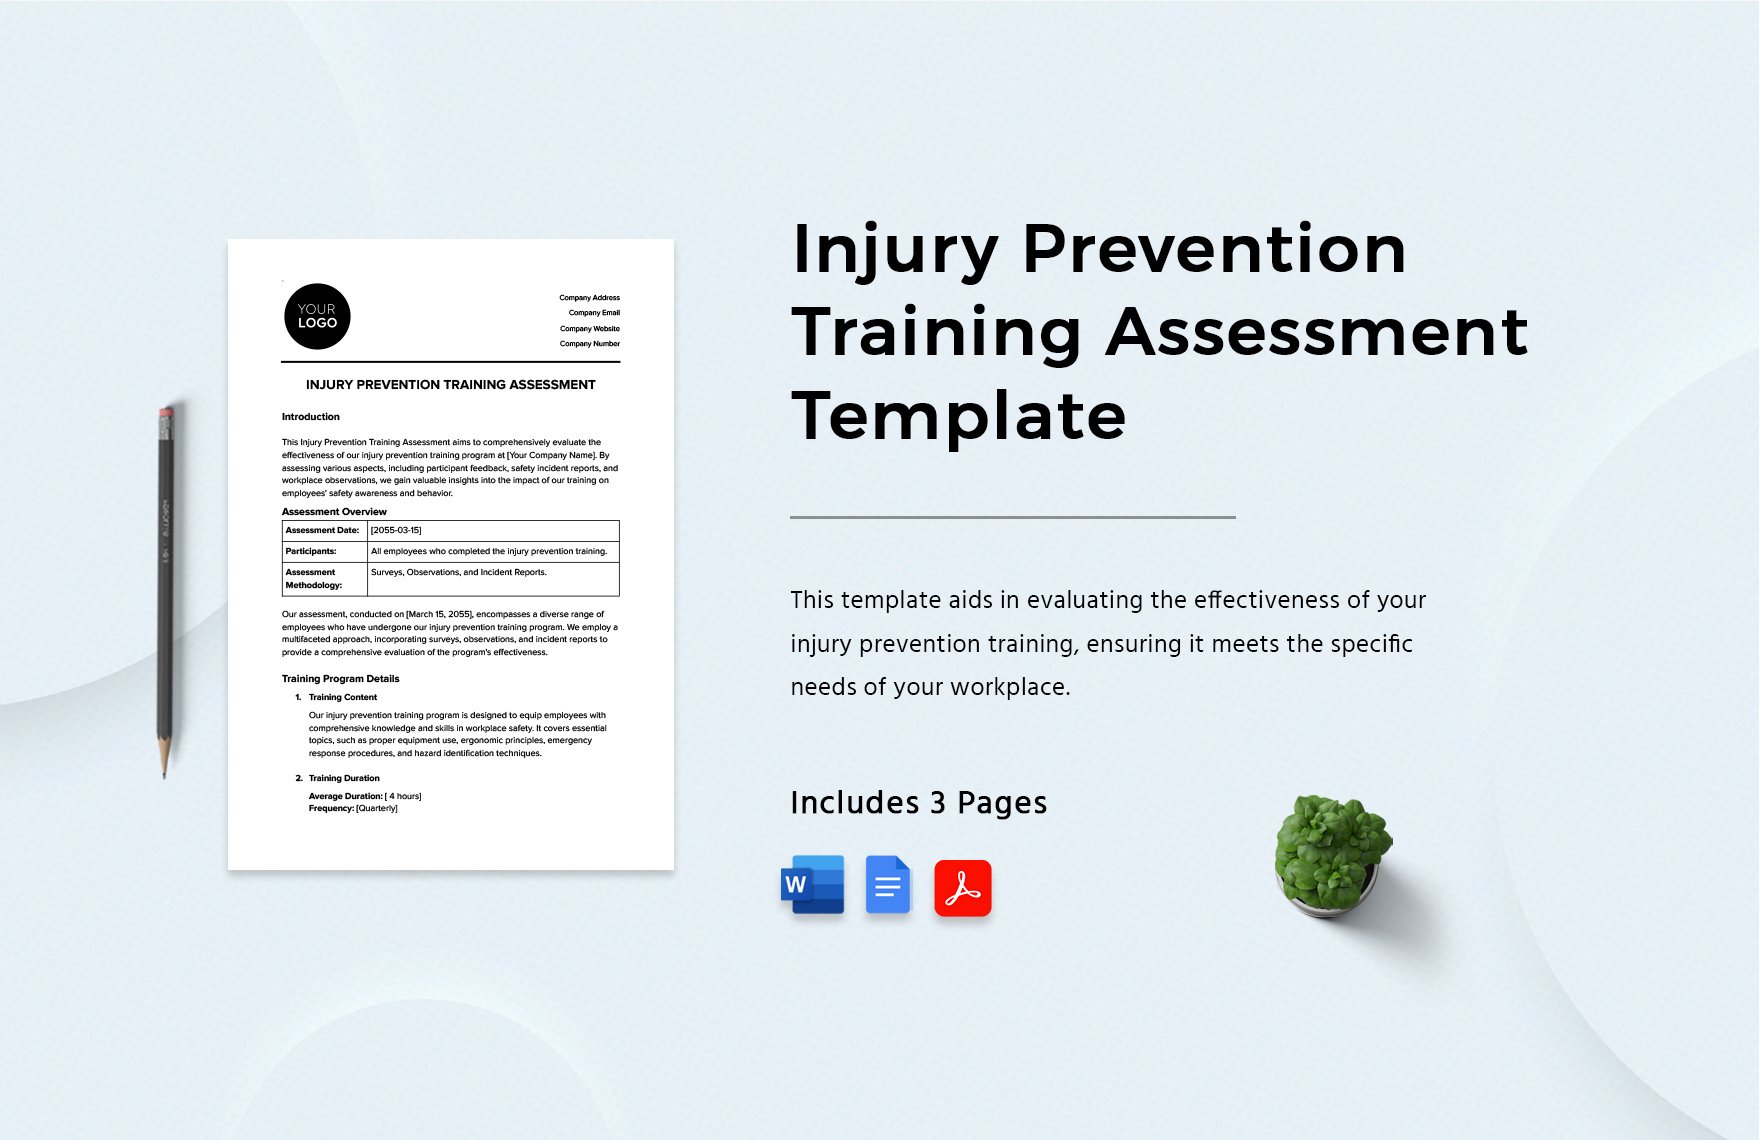 Injury Prevention Training Assessment Template